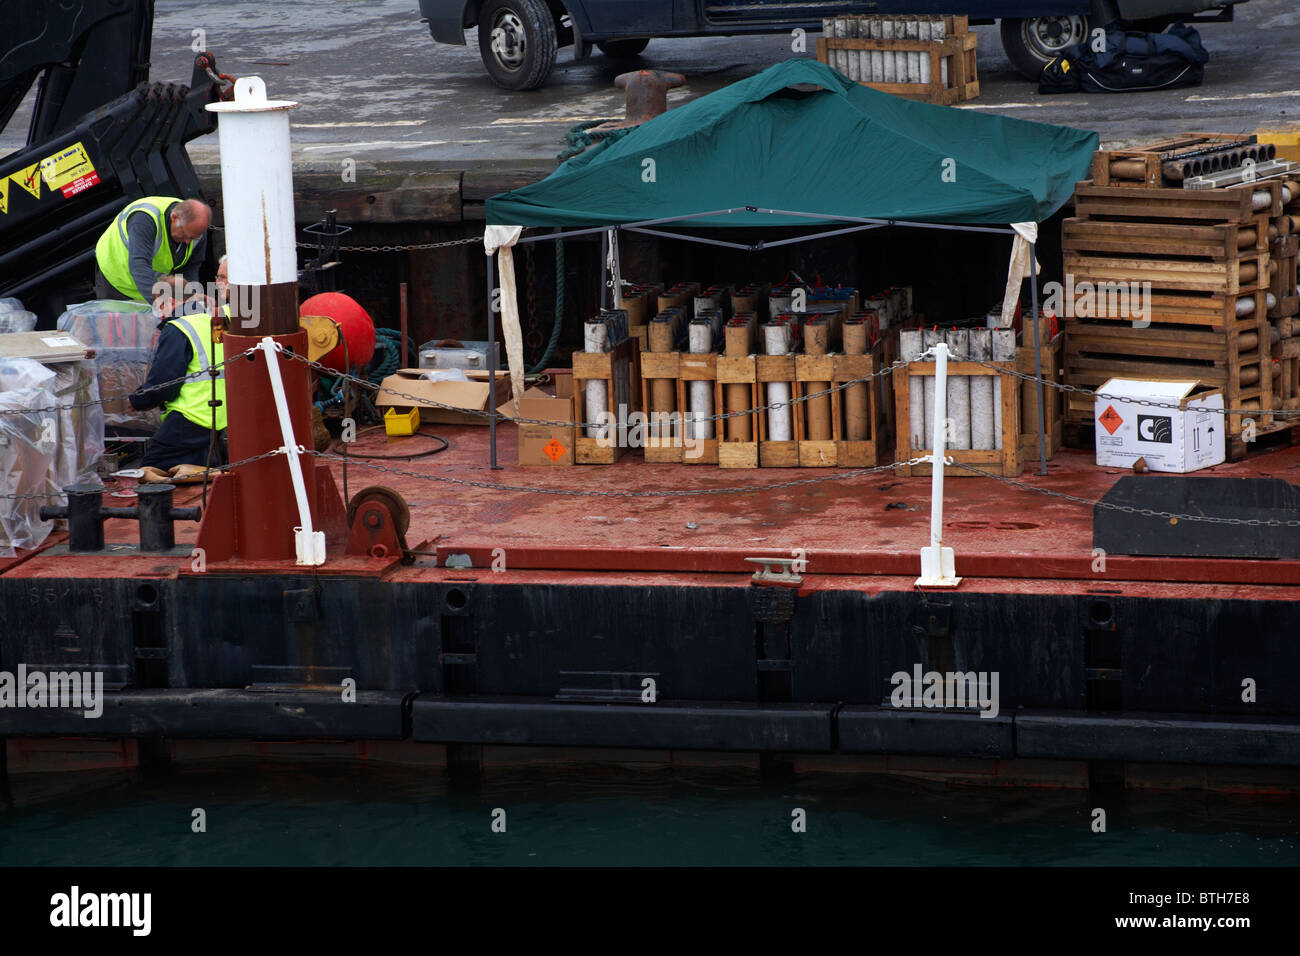 Preparing the fireworks on the platform in Poole Harbour ready for the Poole Quay fireworks display Stock Photo